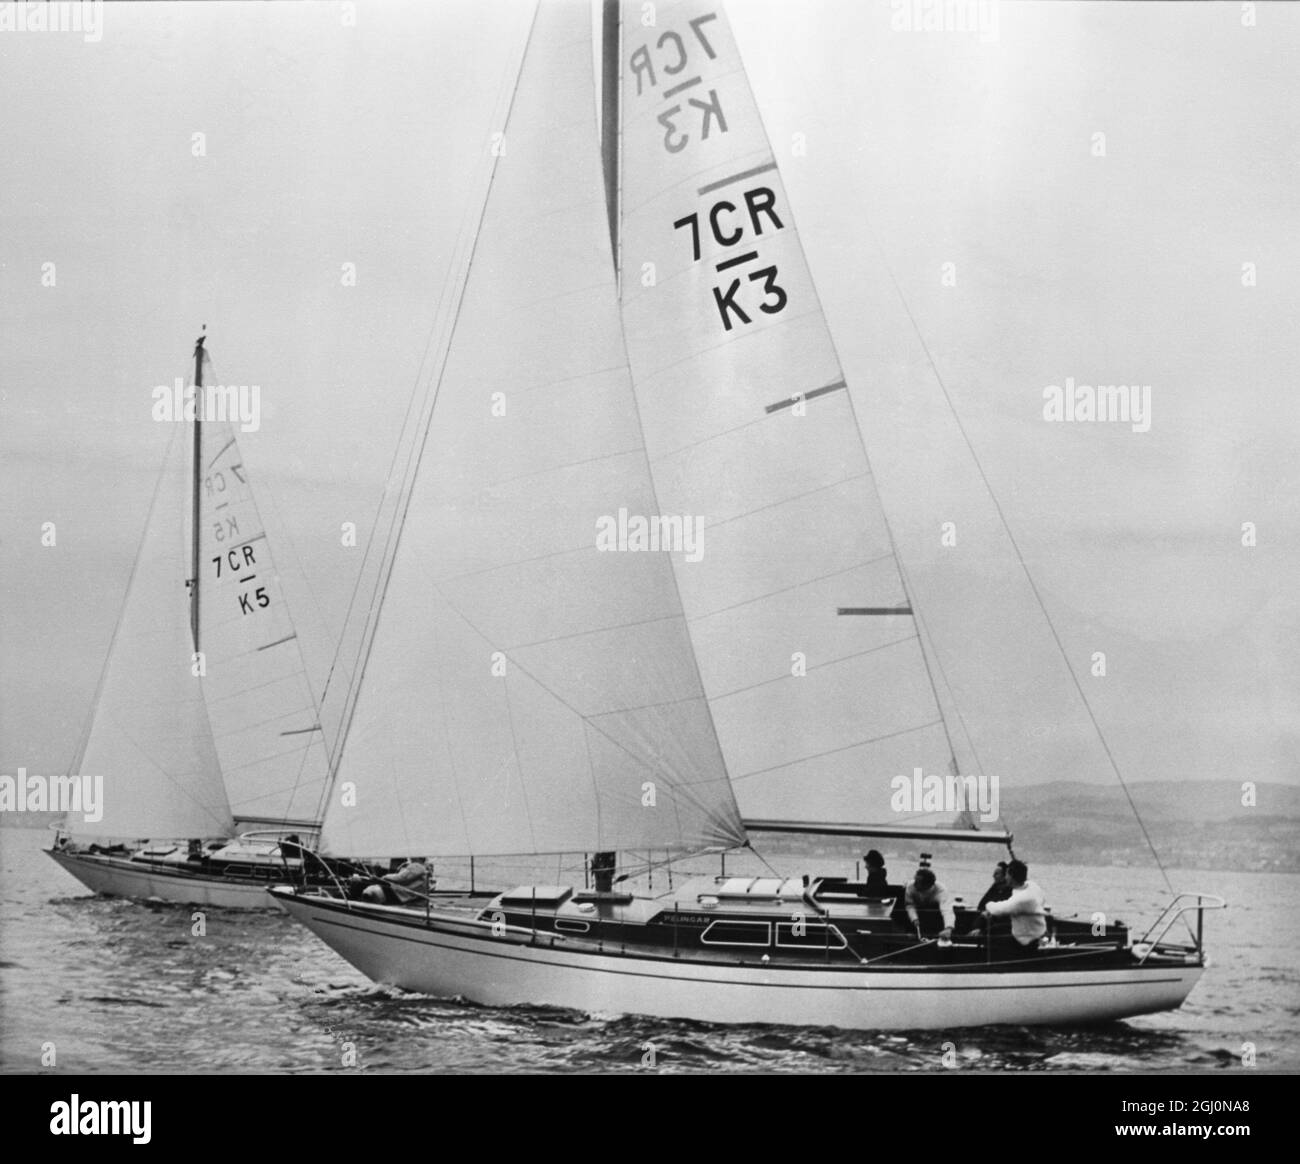 Glasgow, Scotland : The Royal ClydeYacht Club held its opening regatta at Kilcreggan near here on 13th May . This picture show two yachts of the International 7 - metre cruiser - racer class , the SHONA III ( left ) and PELLINGER , during the event . 15 May , 1967 Stock Photo